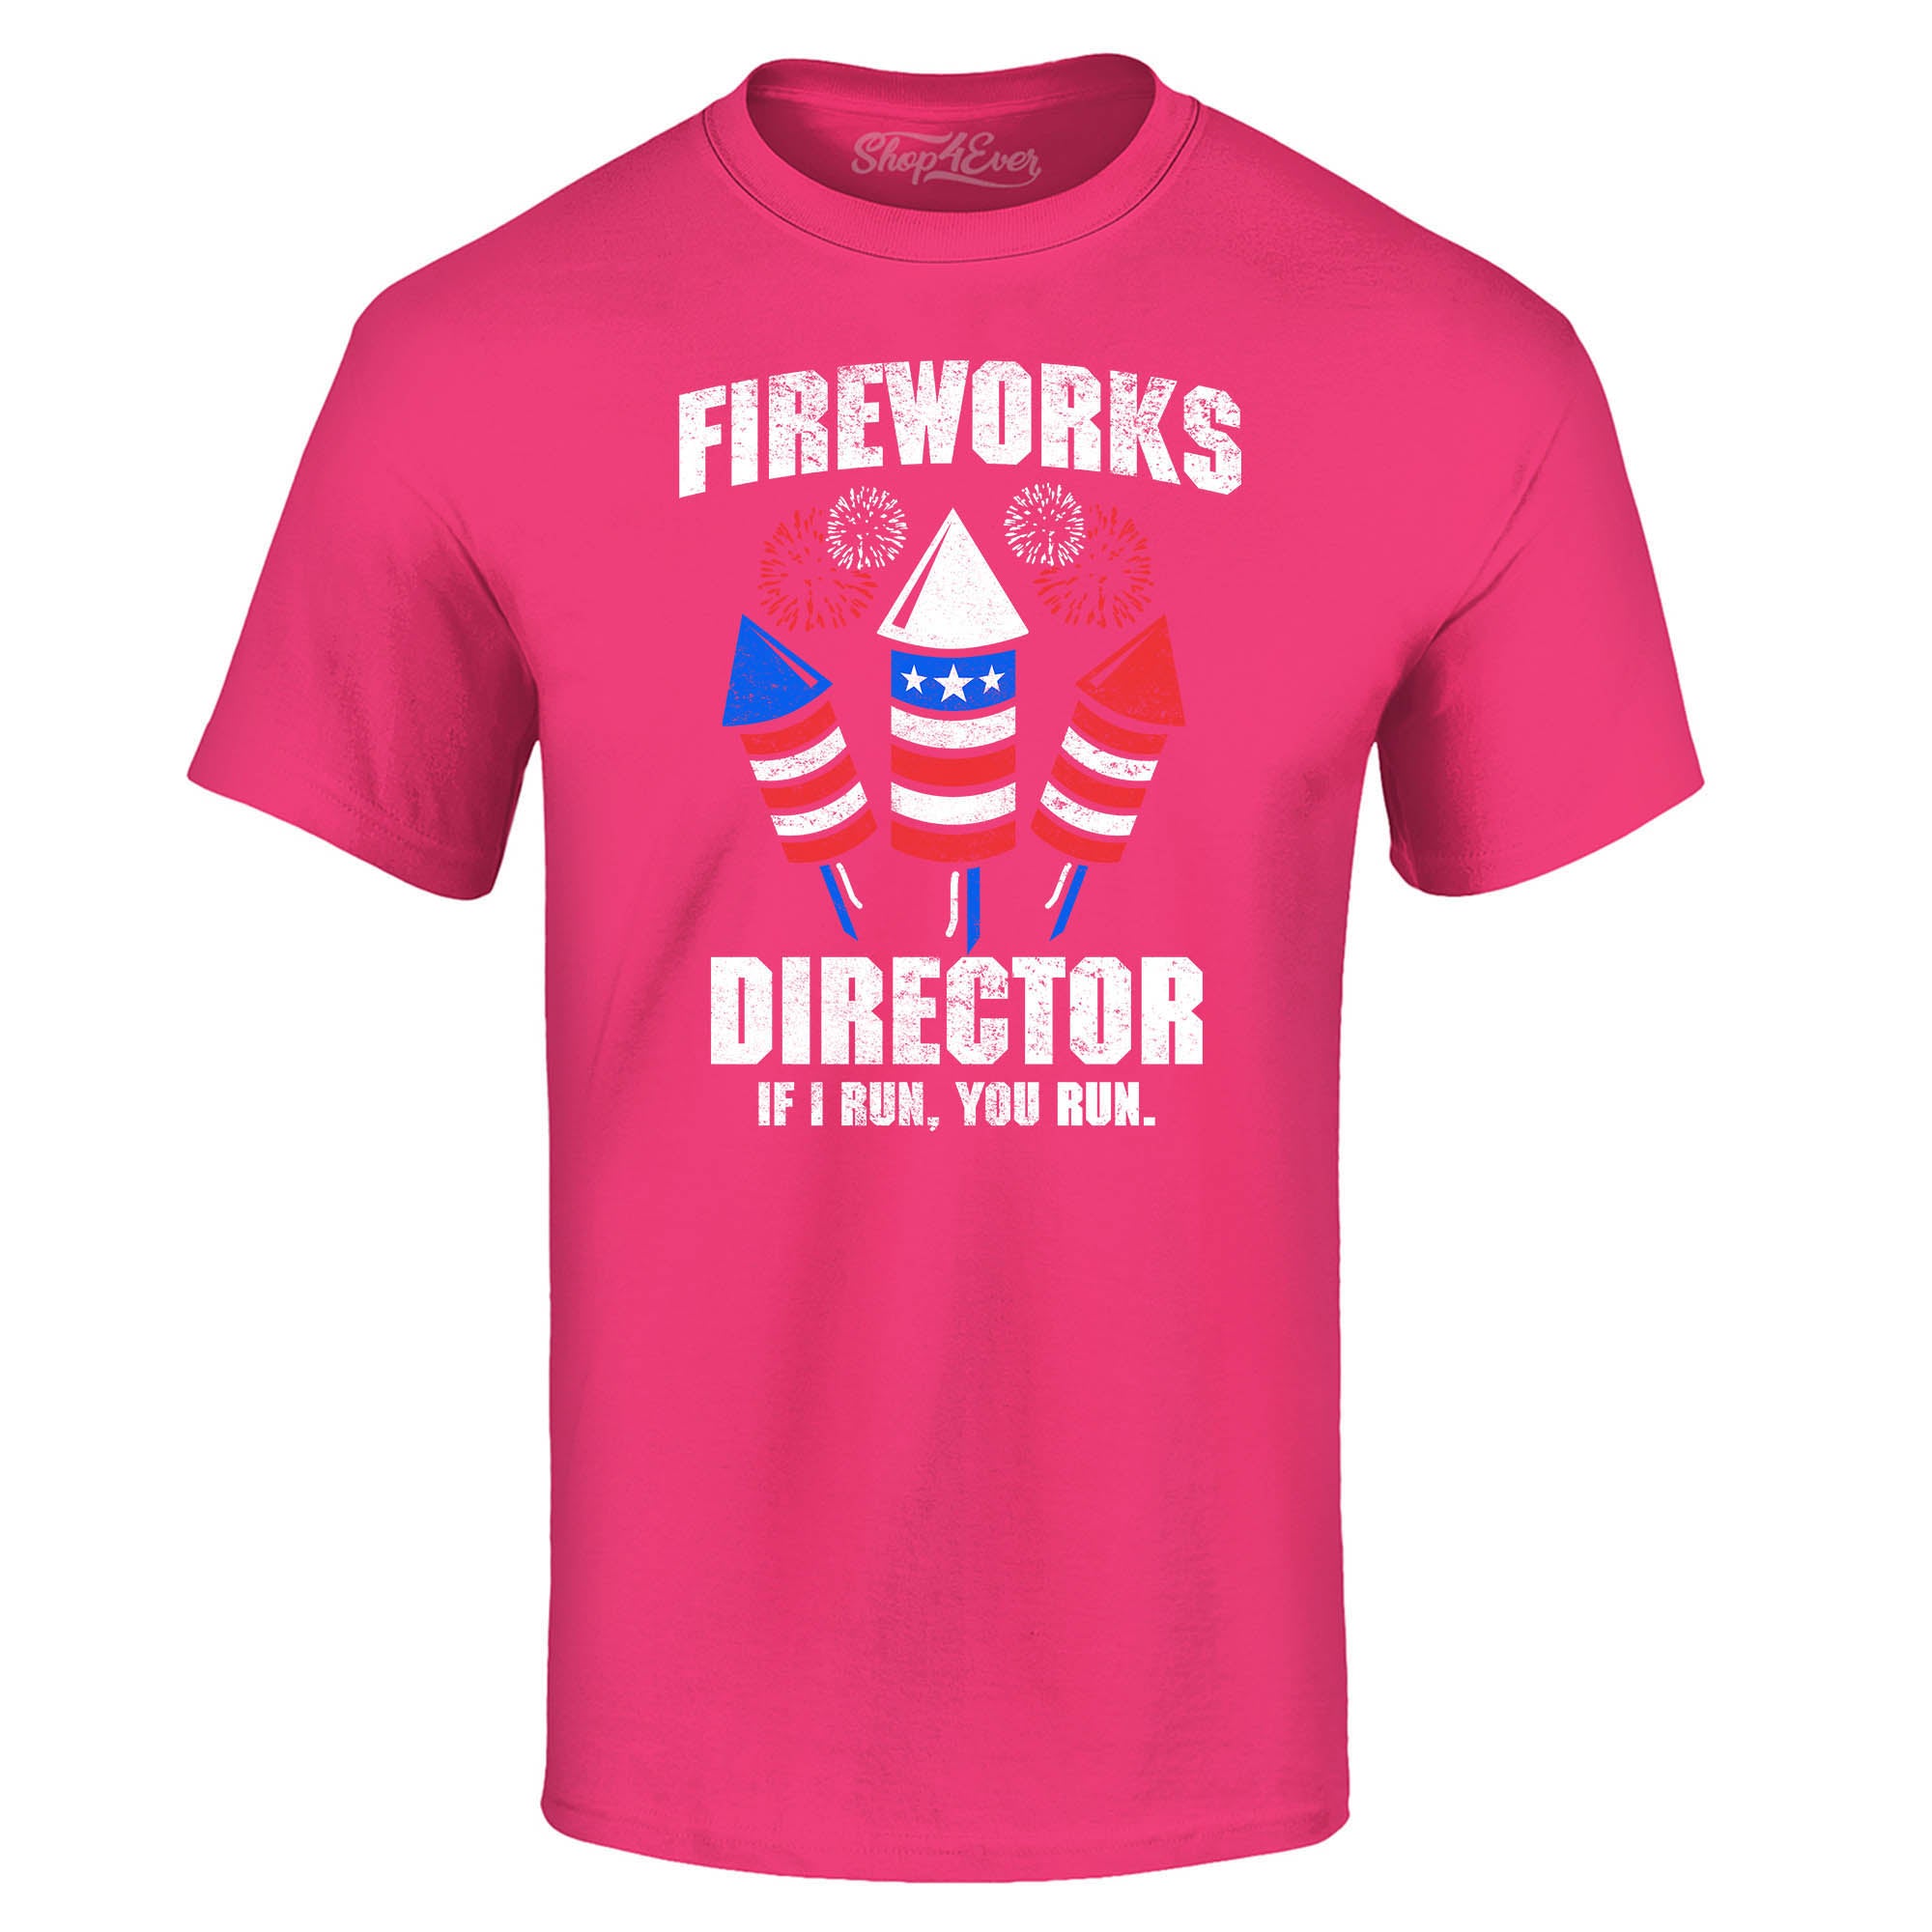 Fireworks Director 4th of July T-Shirt